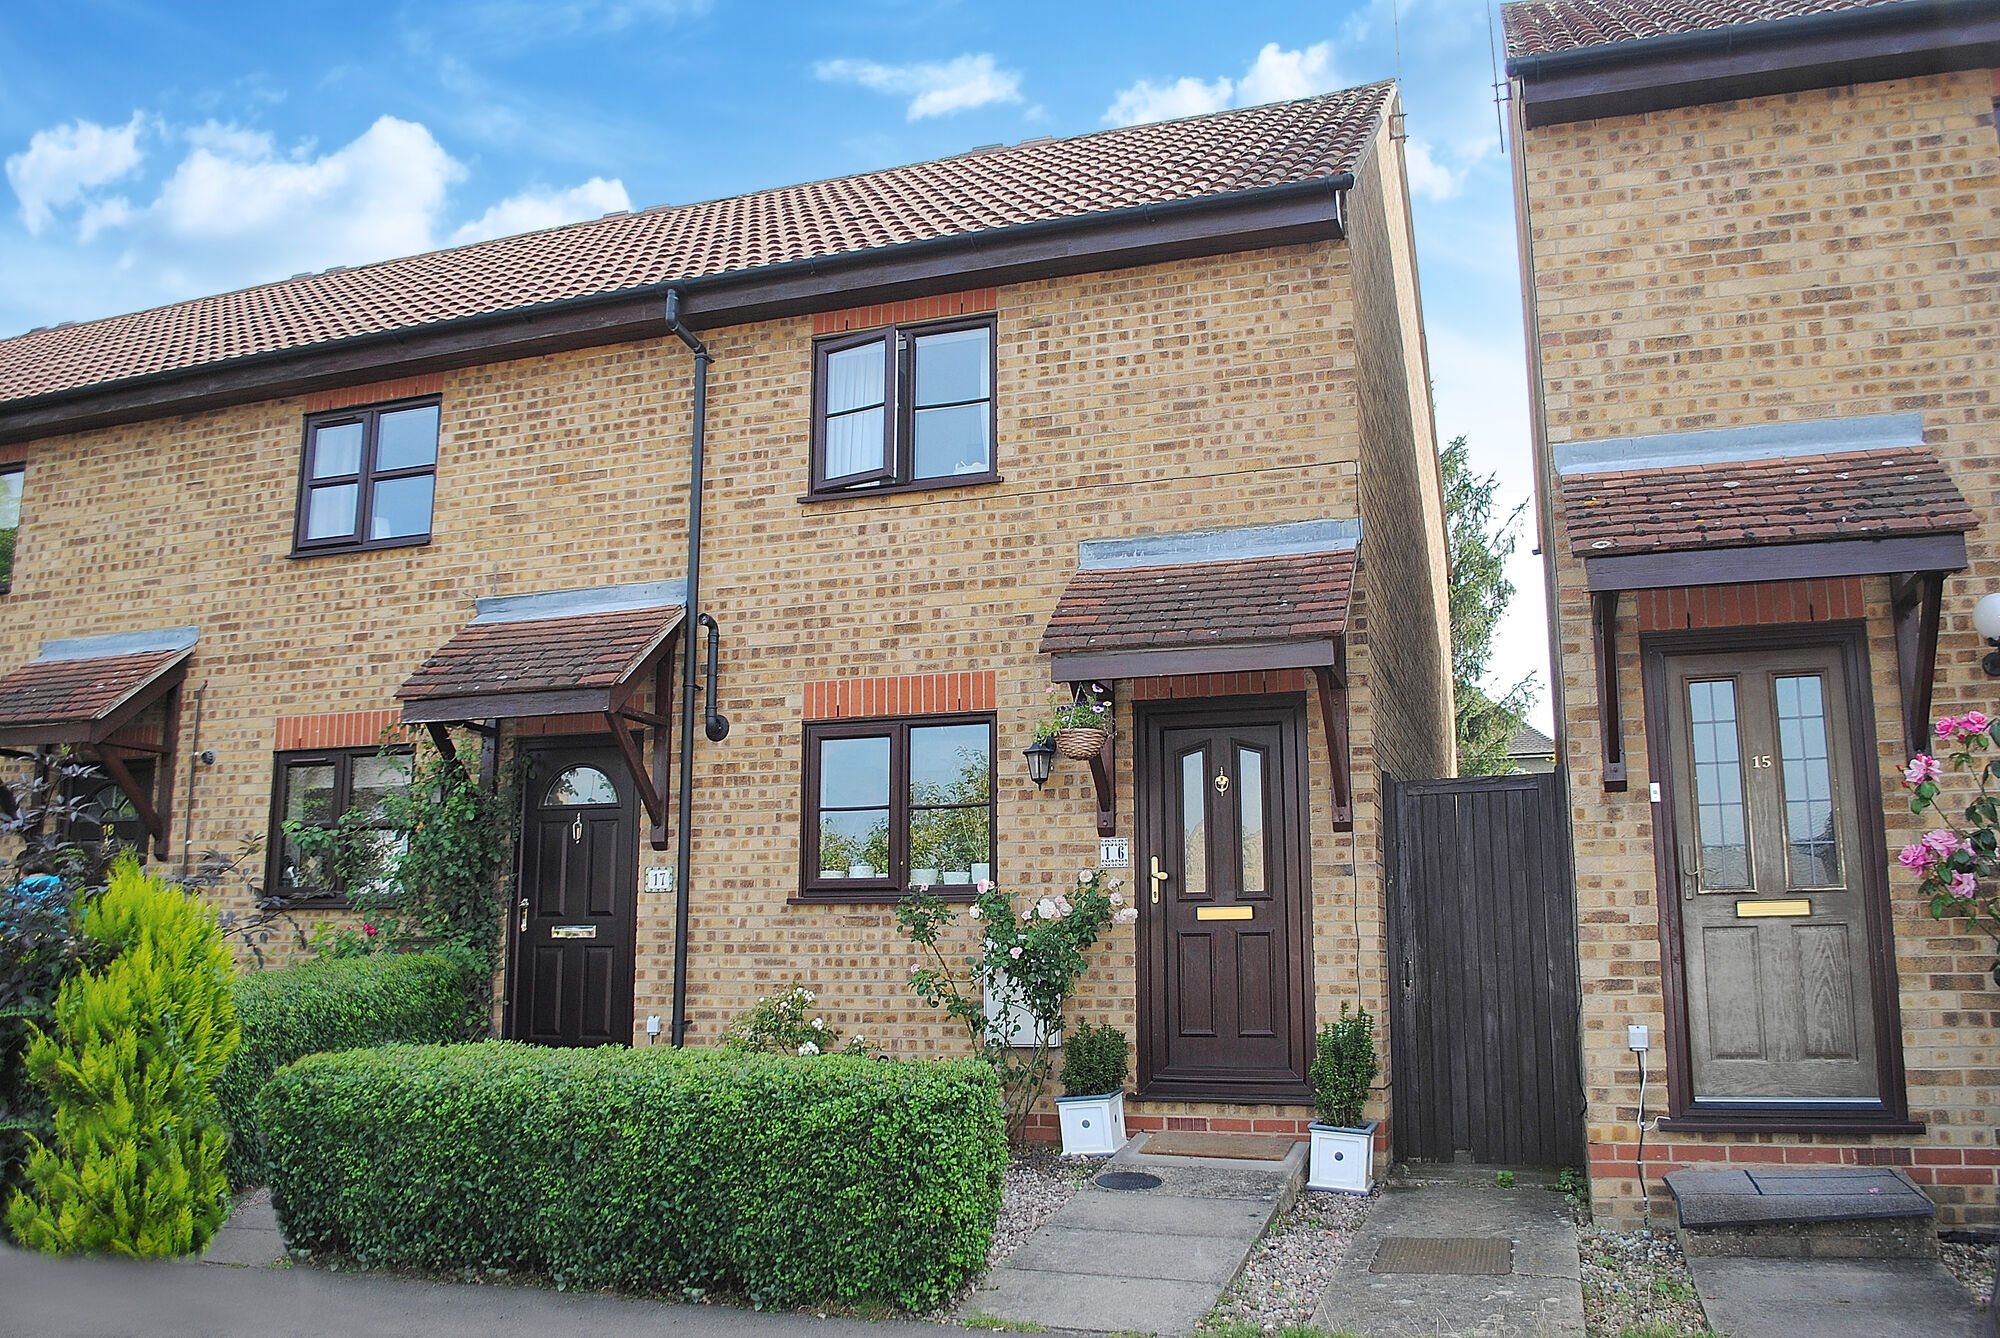 2 bedroom semi detached house to rent, Available from 08/06/2024 Grange Walk, Grange Road, CM23, main image